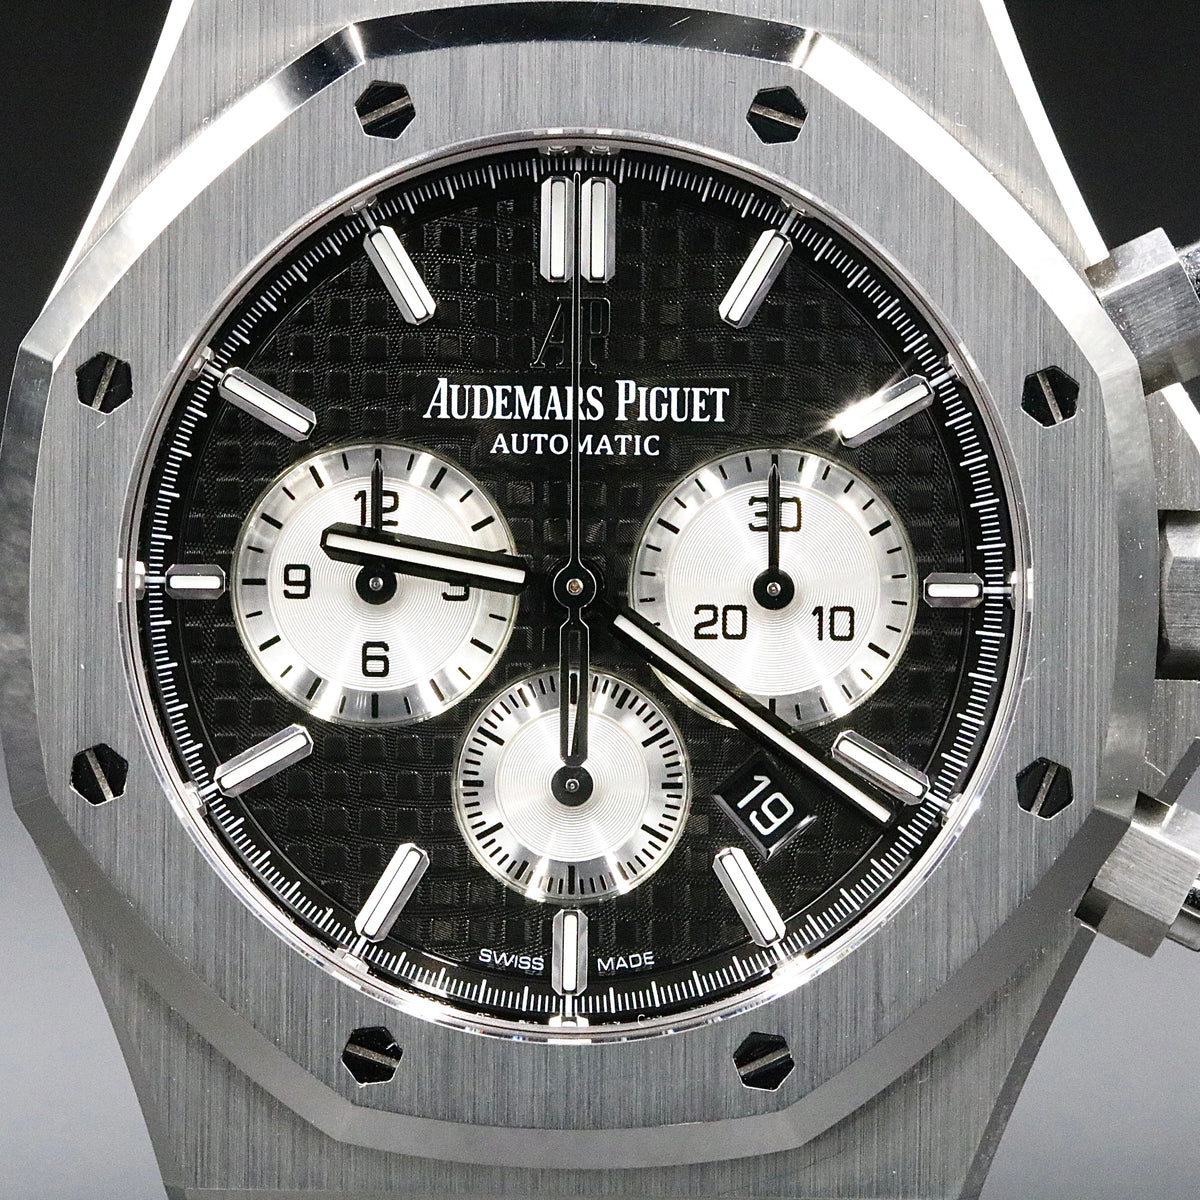 2021 Audemars Piguet 26331ST.OO.1220ST.02 Black Dial Chronograph with Box & Papers